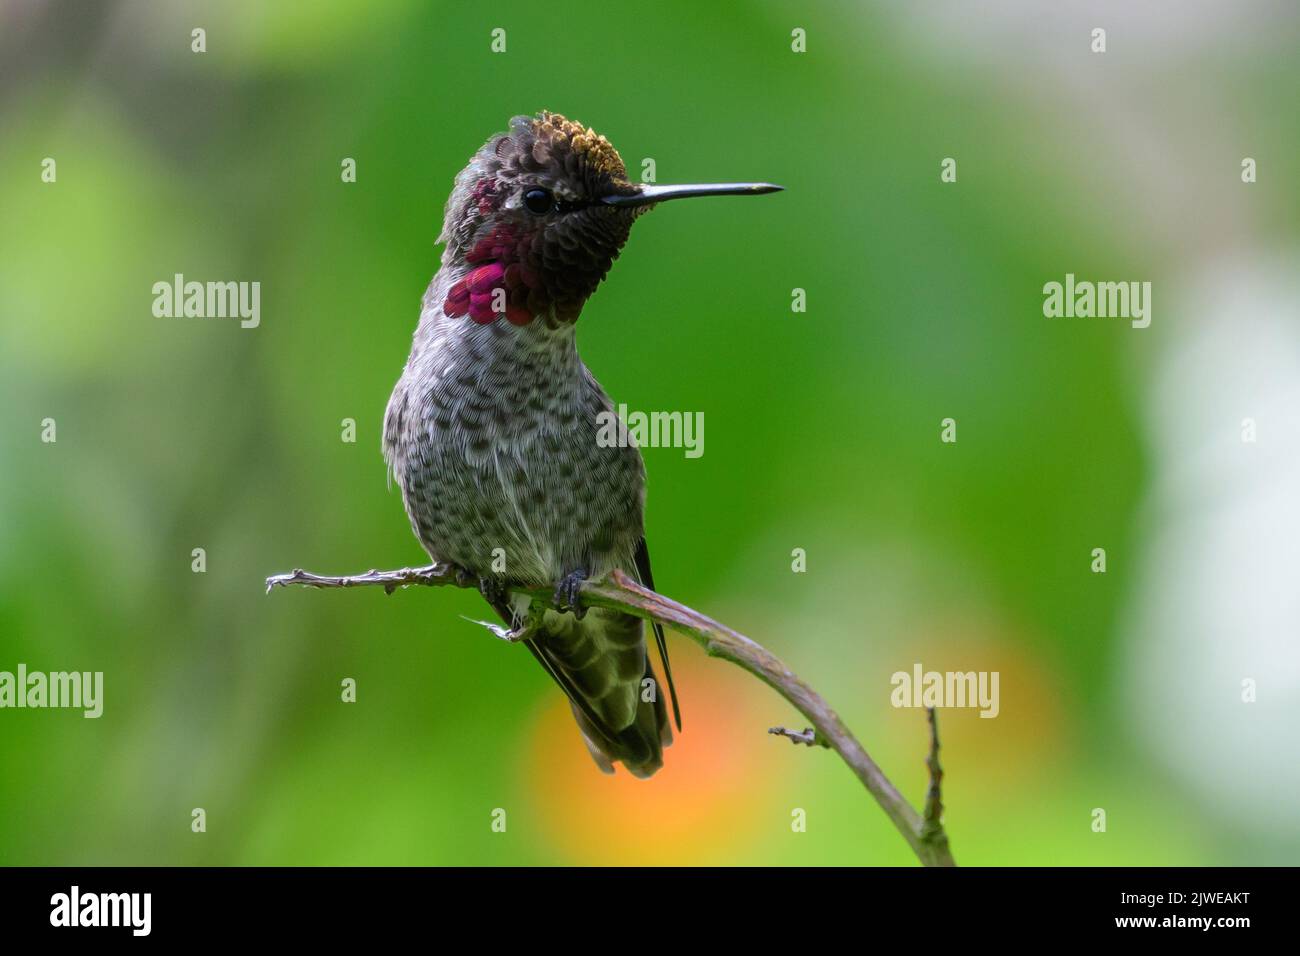 Portrait of an Anna's Hummingbird sitting on a branch, British Columbia, Canada Stock Photo